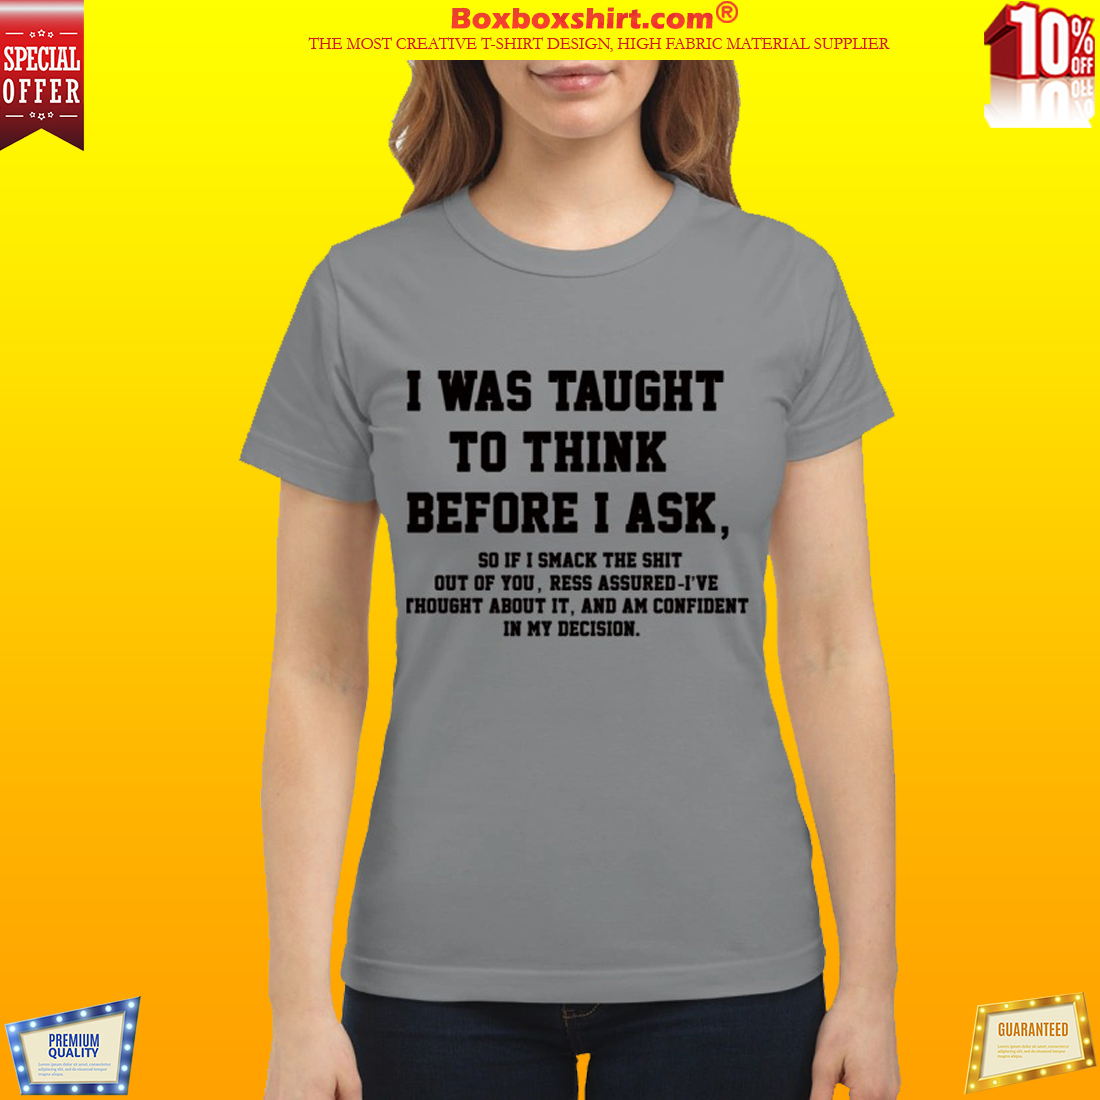 I was taught to think before I ask classic shirt